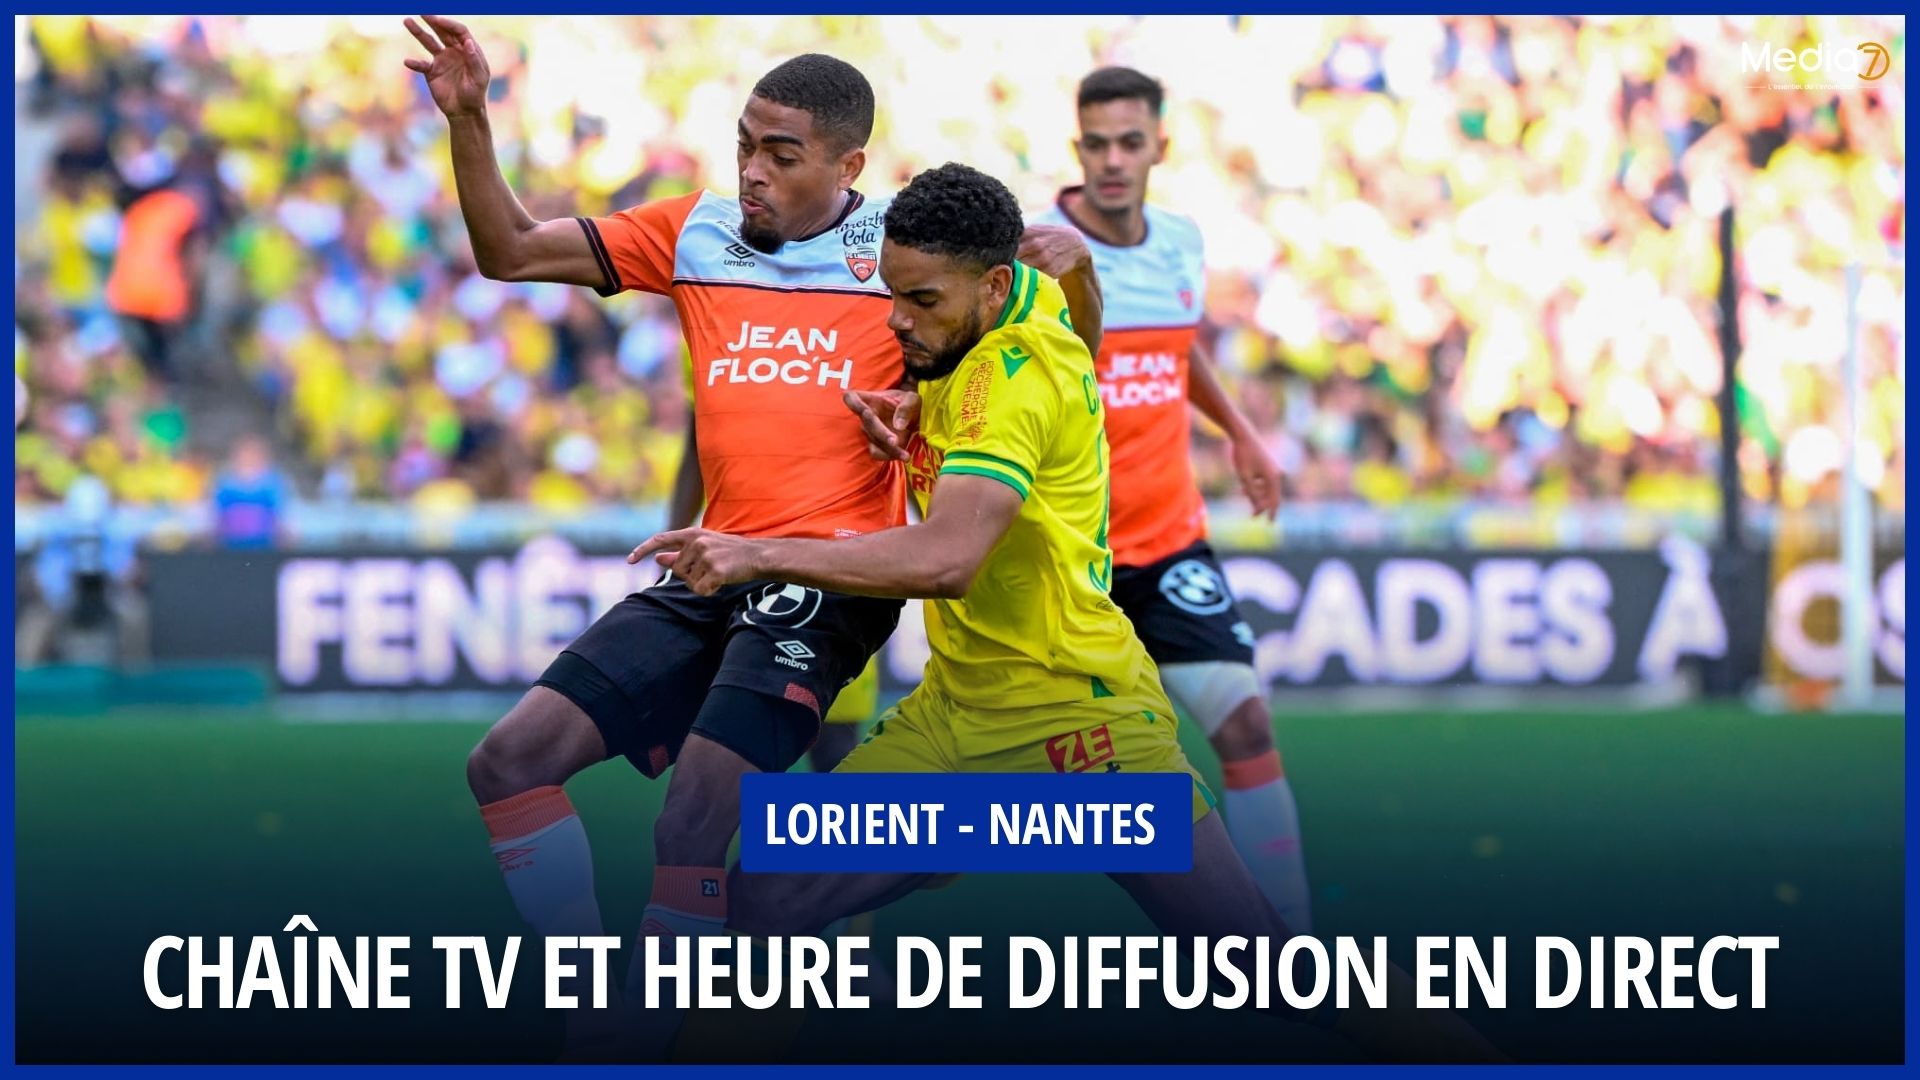 Lorient - Nantes match live: TV channel and broadcast time - Media7